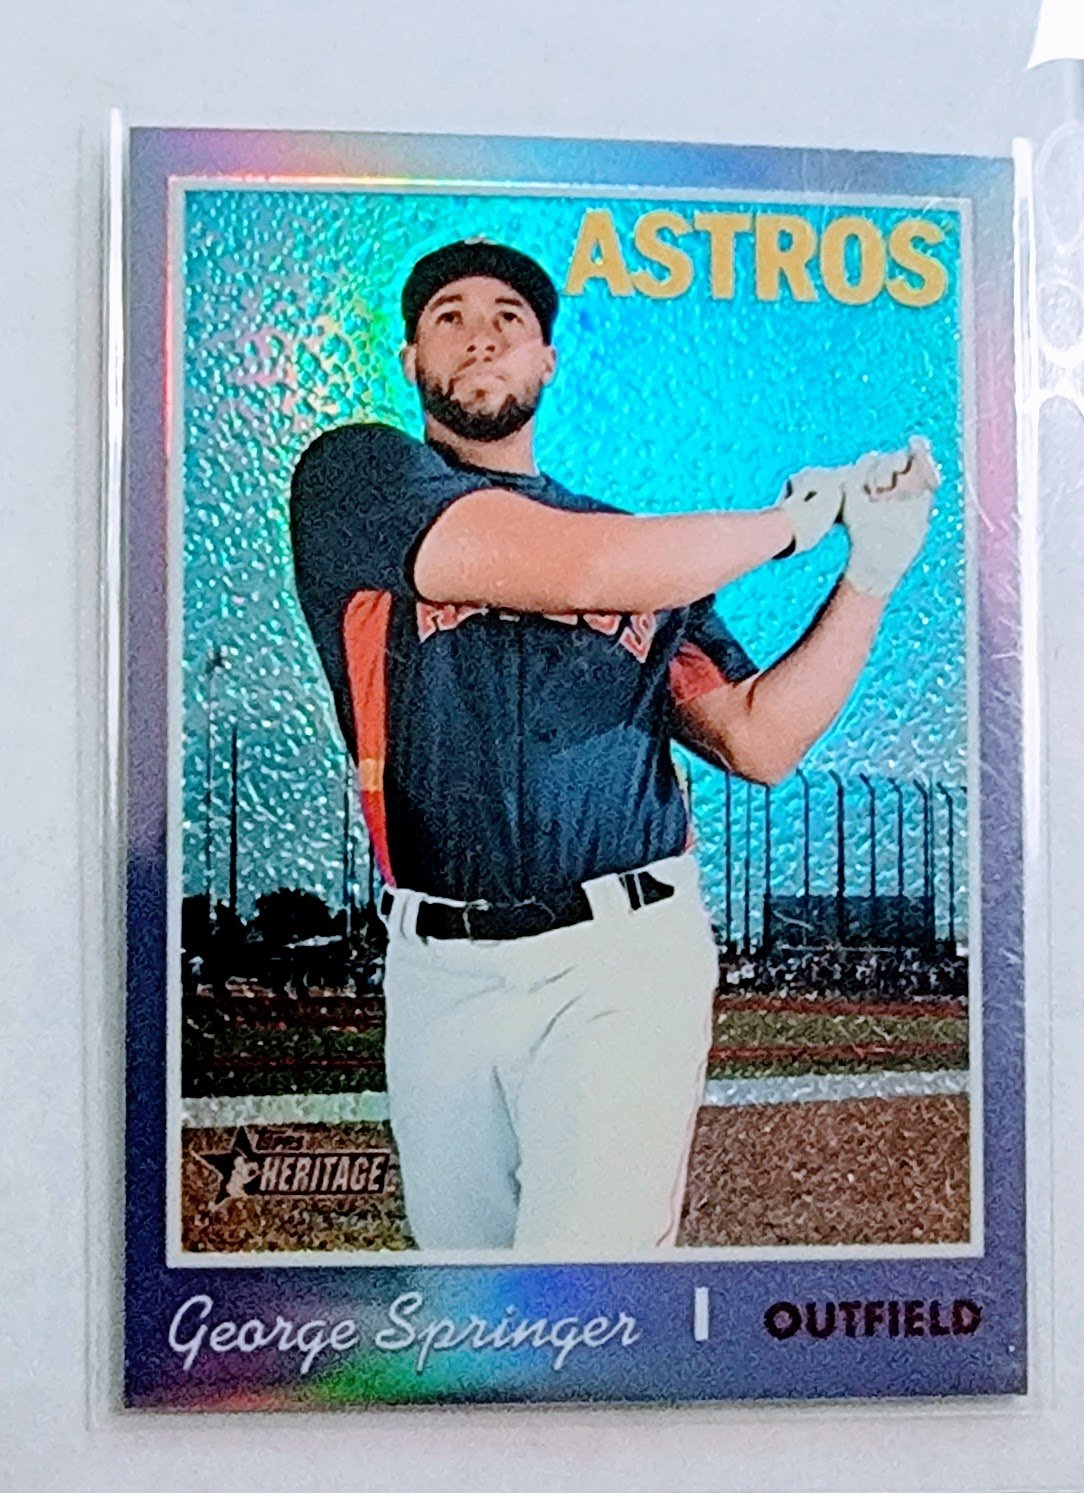 2019 Topps Heritage George Springer Chrome Refractor Baseball Card TPTV simple Xclusive Collectibles   